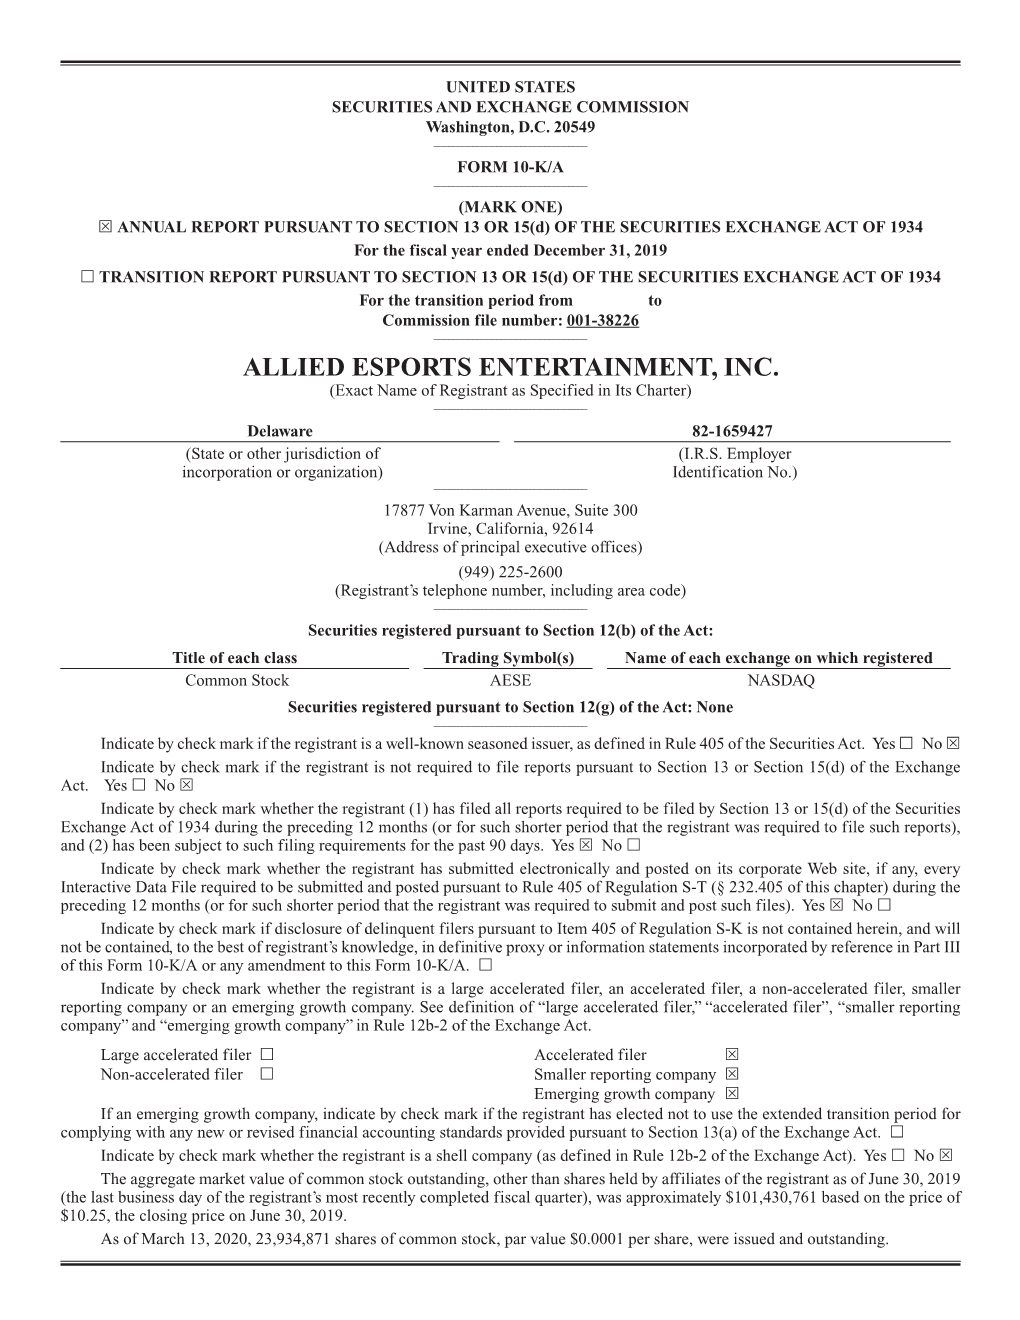 ALLIED ESPORTS ENTERTAINMENT, INC. (Exact Name of Registrant As Specified in Its Charter) ______Delaware 82-1659427 (State Or Other Jurisdiction of (I.R.S